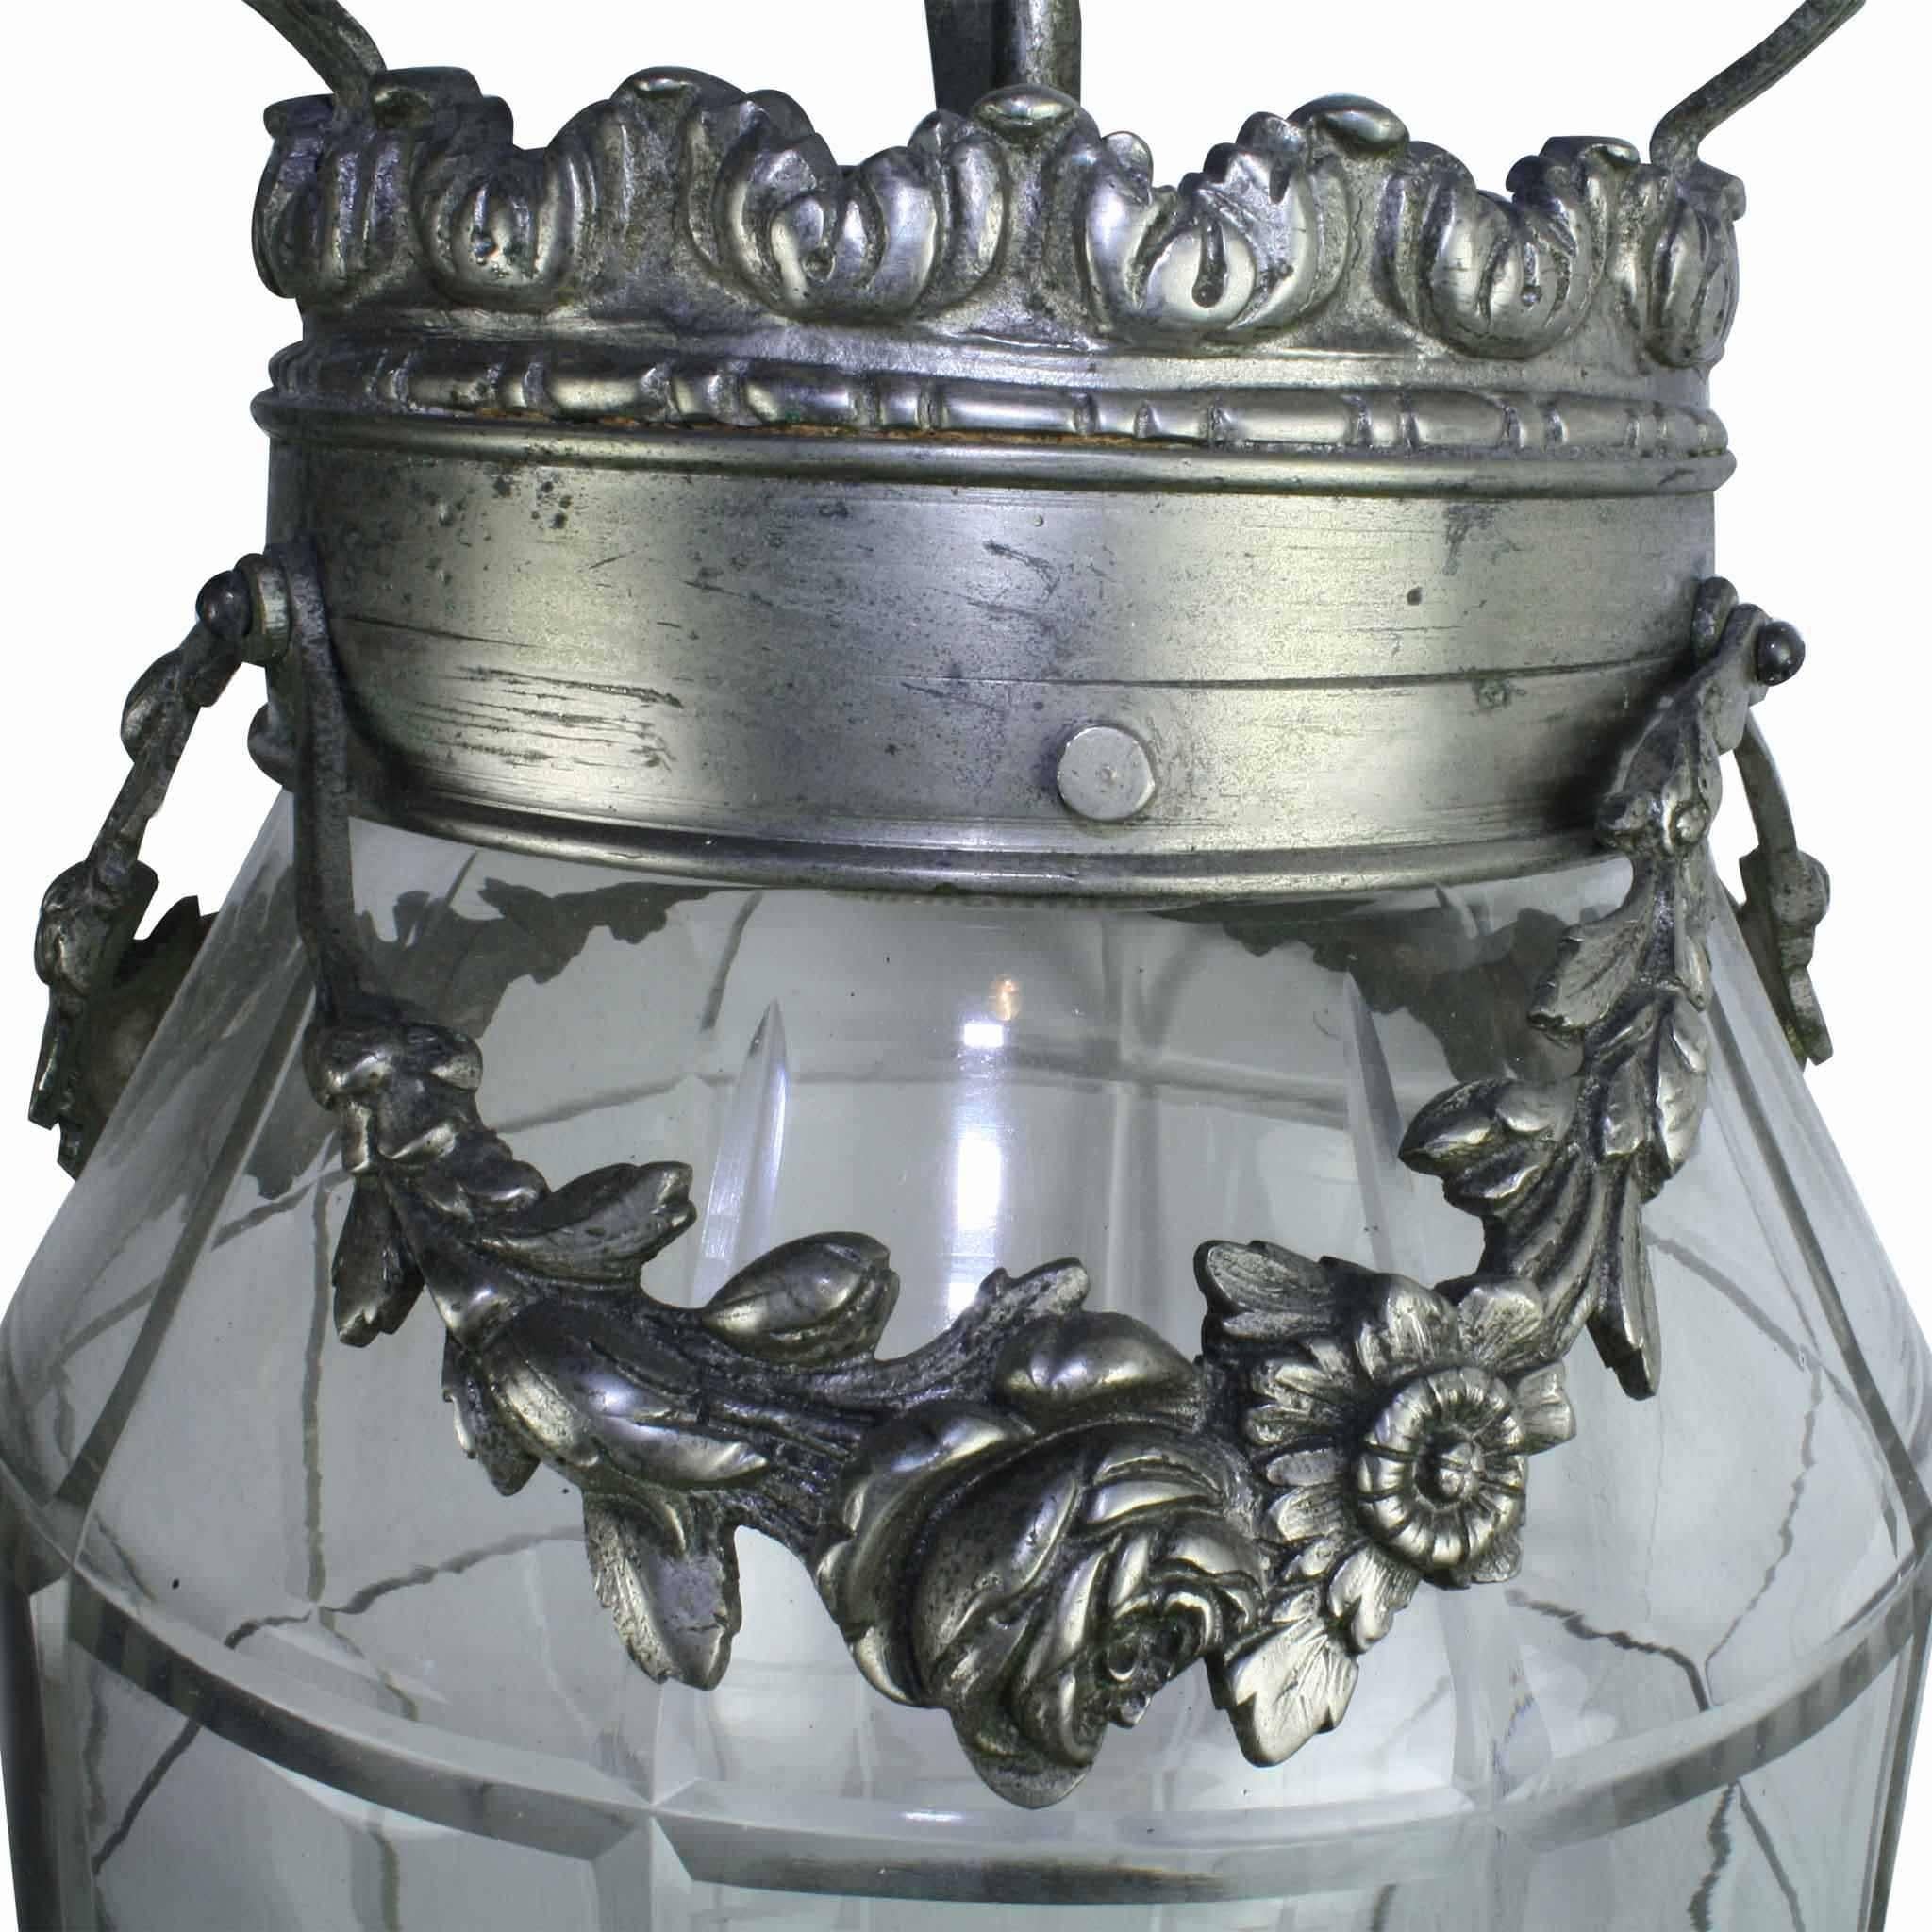 Spanning the Art Deco and Art Nouveau stylistic periods, this lantern features a floral vine that falls in graceful lines about the top crown. The lantern has a decorative canopy and chain. An ornament finial of a bunch of grapes caps the bottom.